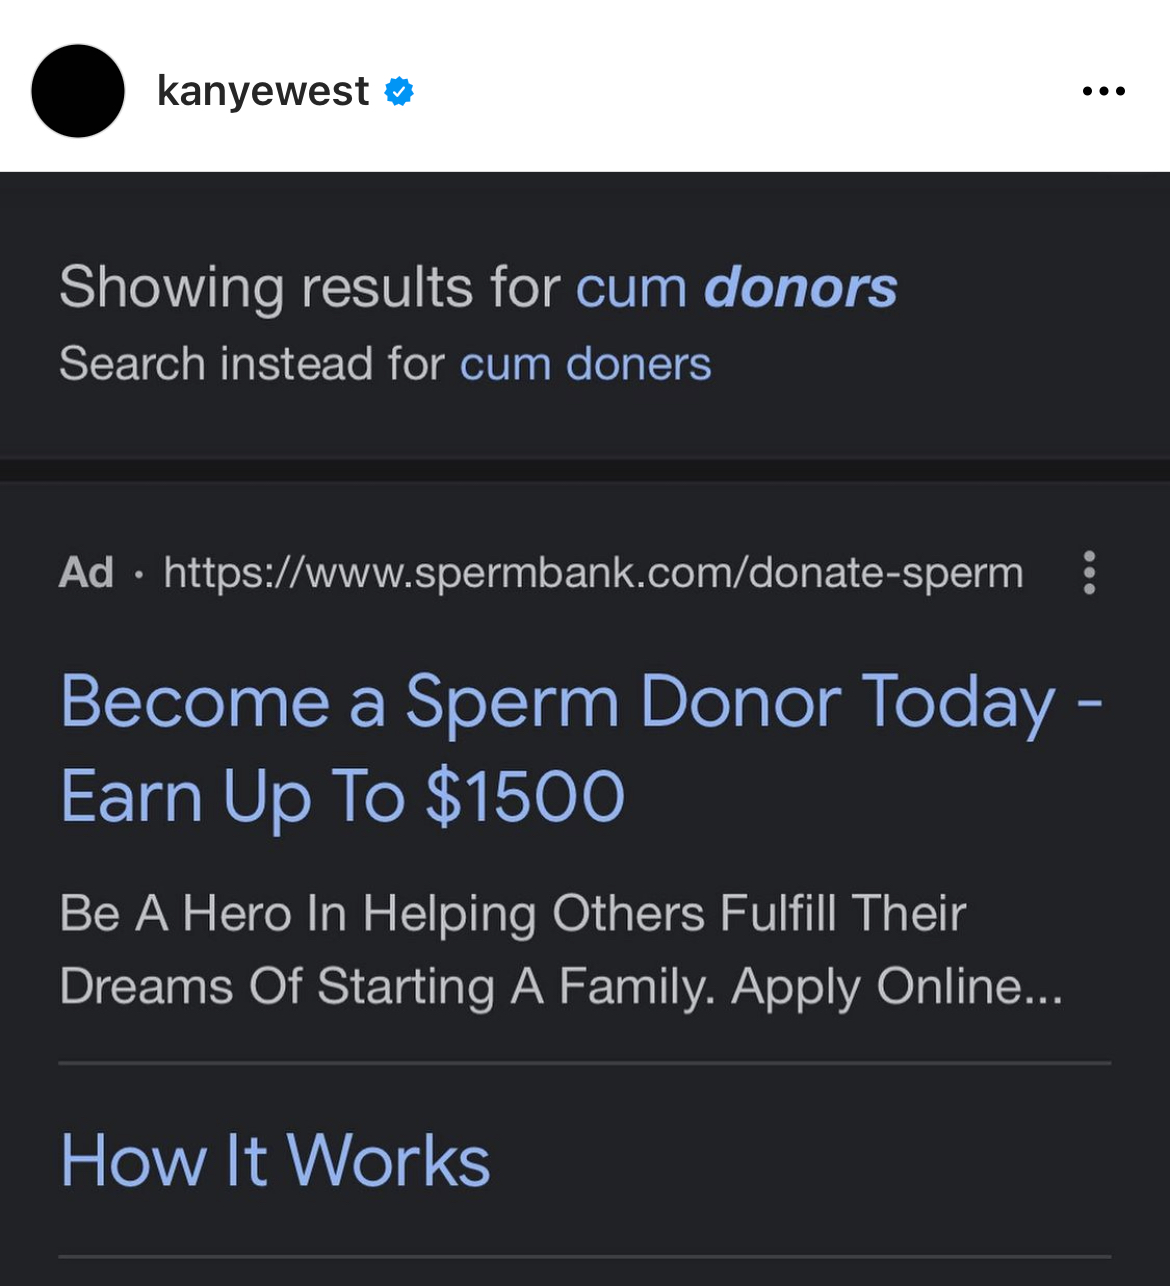 Kanye West Instagram Meltdown - software - kanyewest Showing results for cum donors Search instead for cum doners Ad Become a Sperm Donor Today Earn Up To $1500 Be A Hero In Helping Others Fulfill Their Dreams Of Starting A Family. Apply Online... ... How